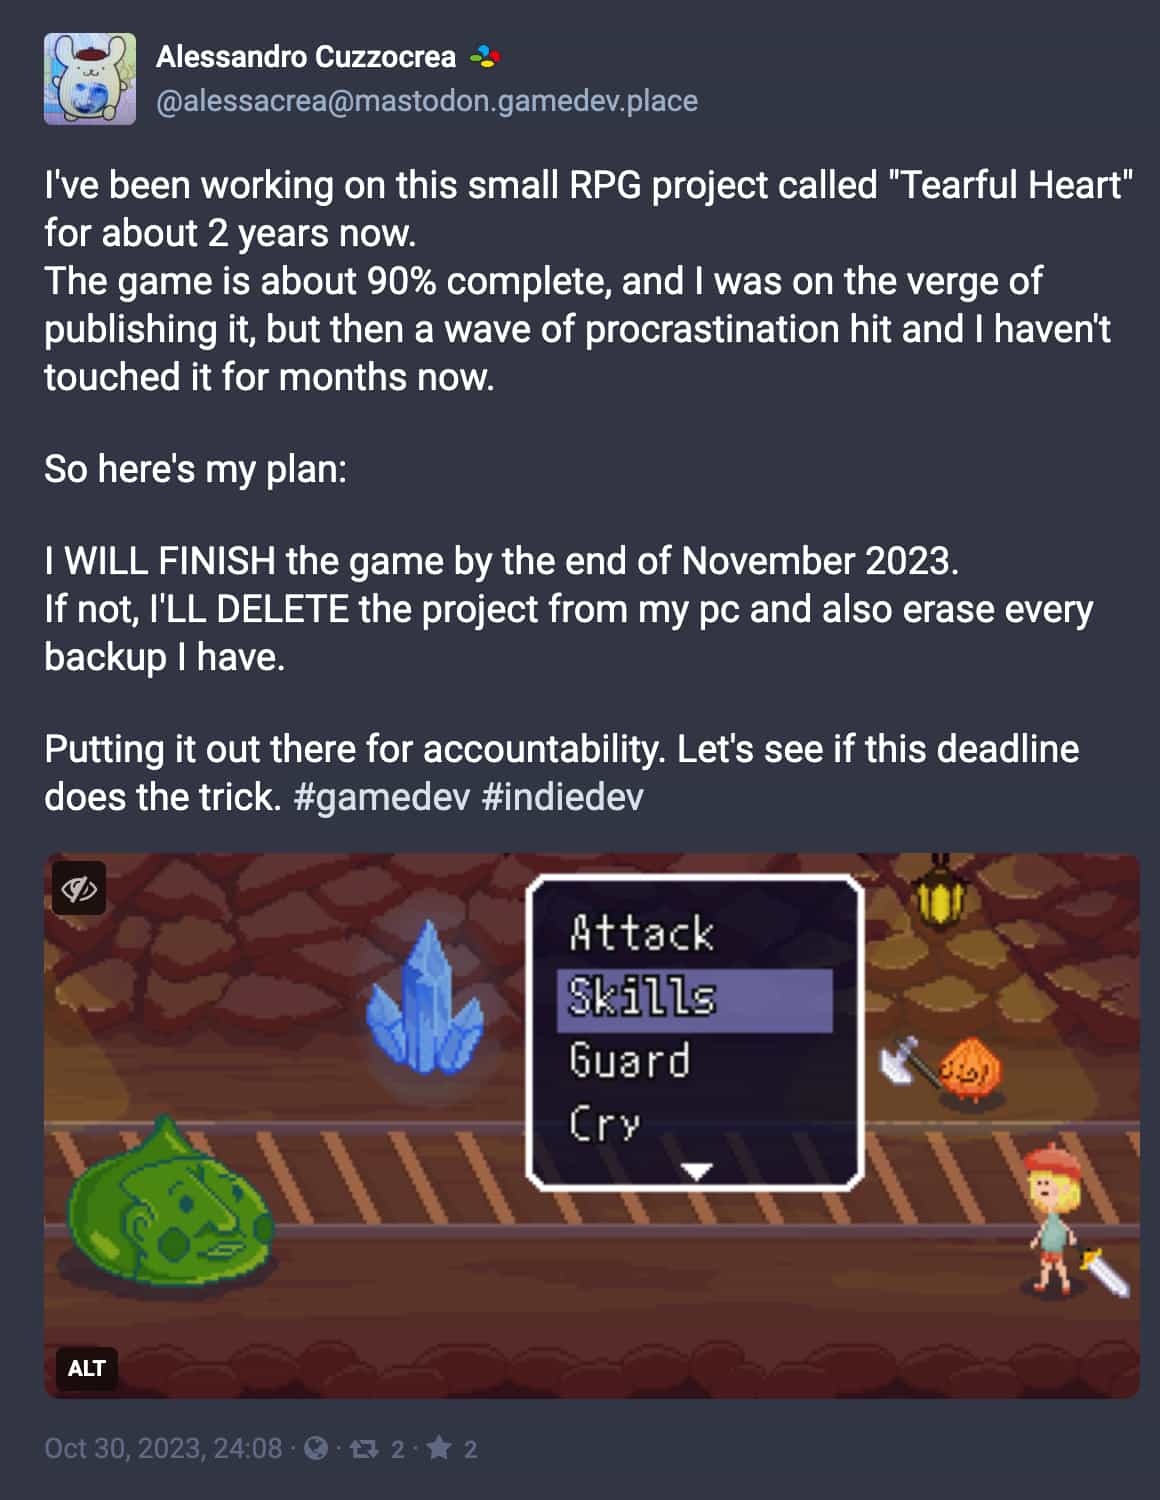 Screenshot of a Mastodon post by Alessandro Cuzzocrea, detailing their commitment to finish the RPG Tearful Heart by the end of November 2023, with the ultimatum of deleting the project if not completed. The post includes an image of the game's combat system